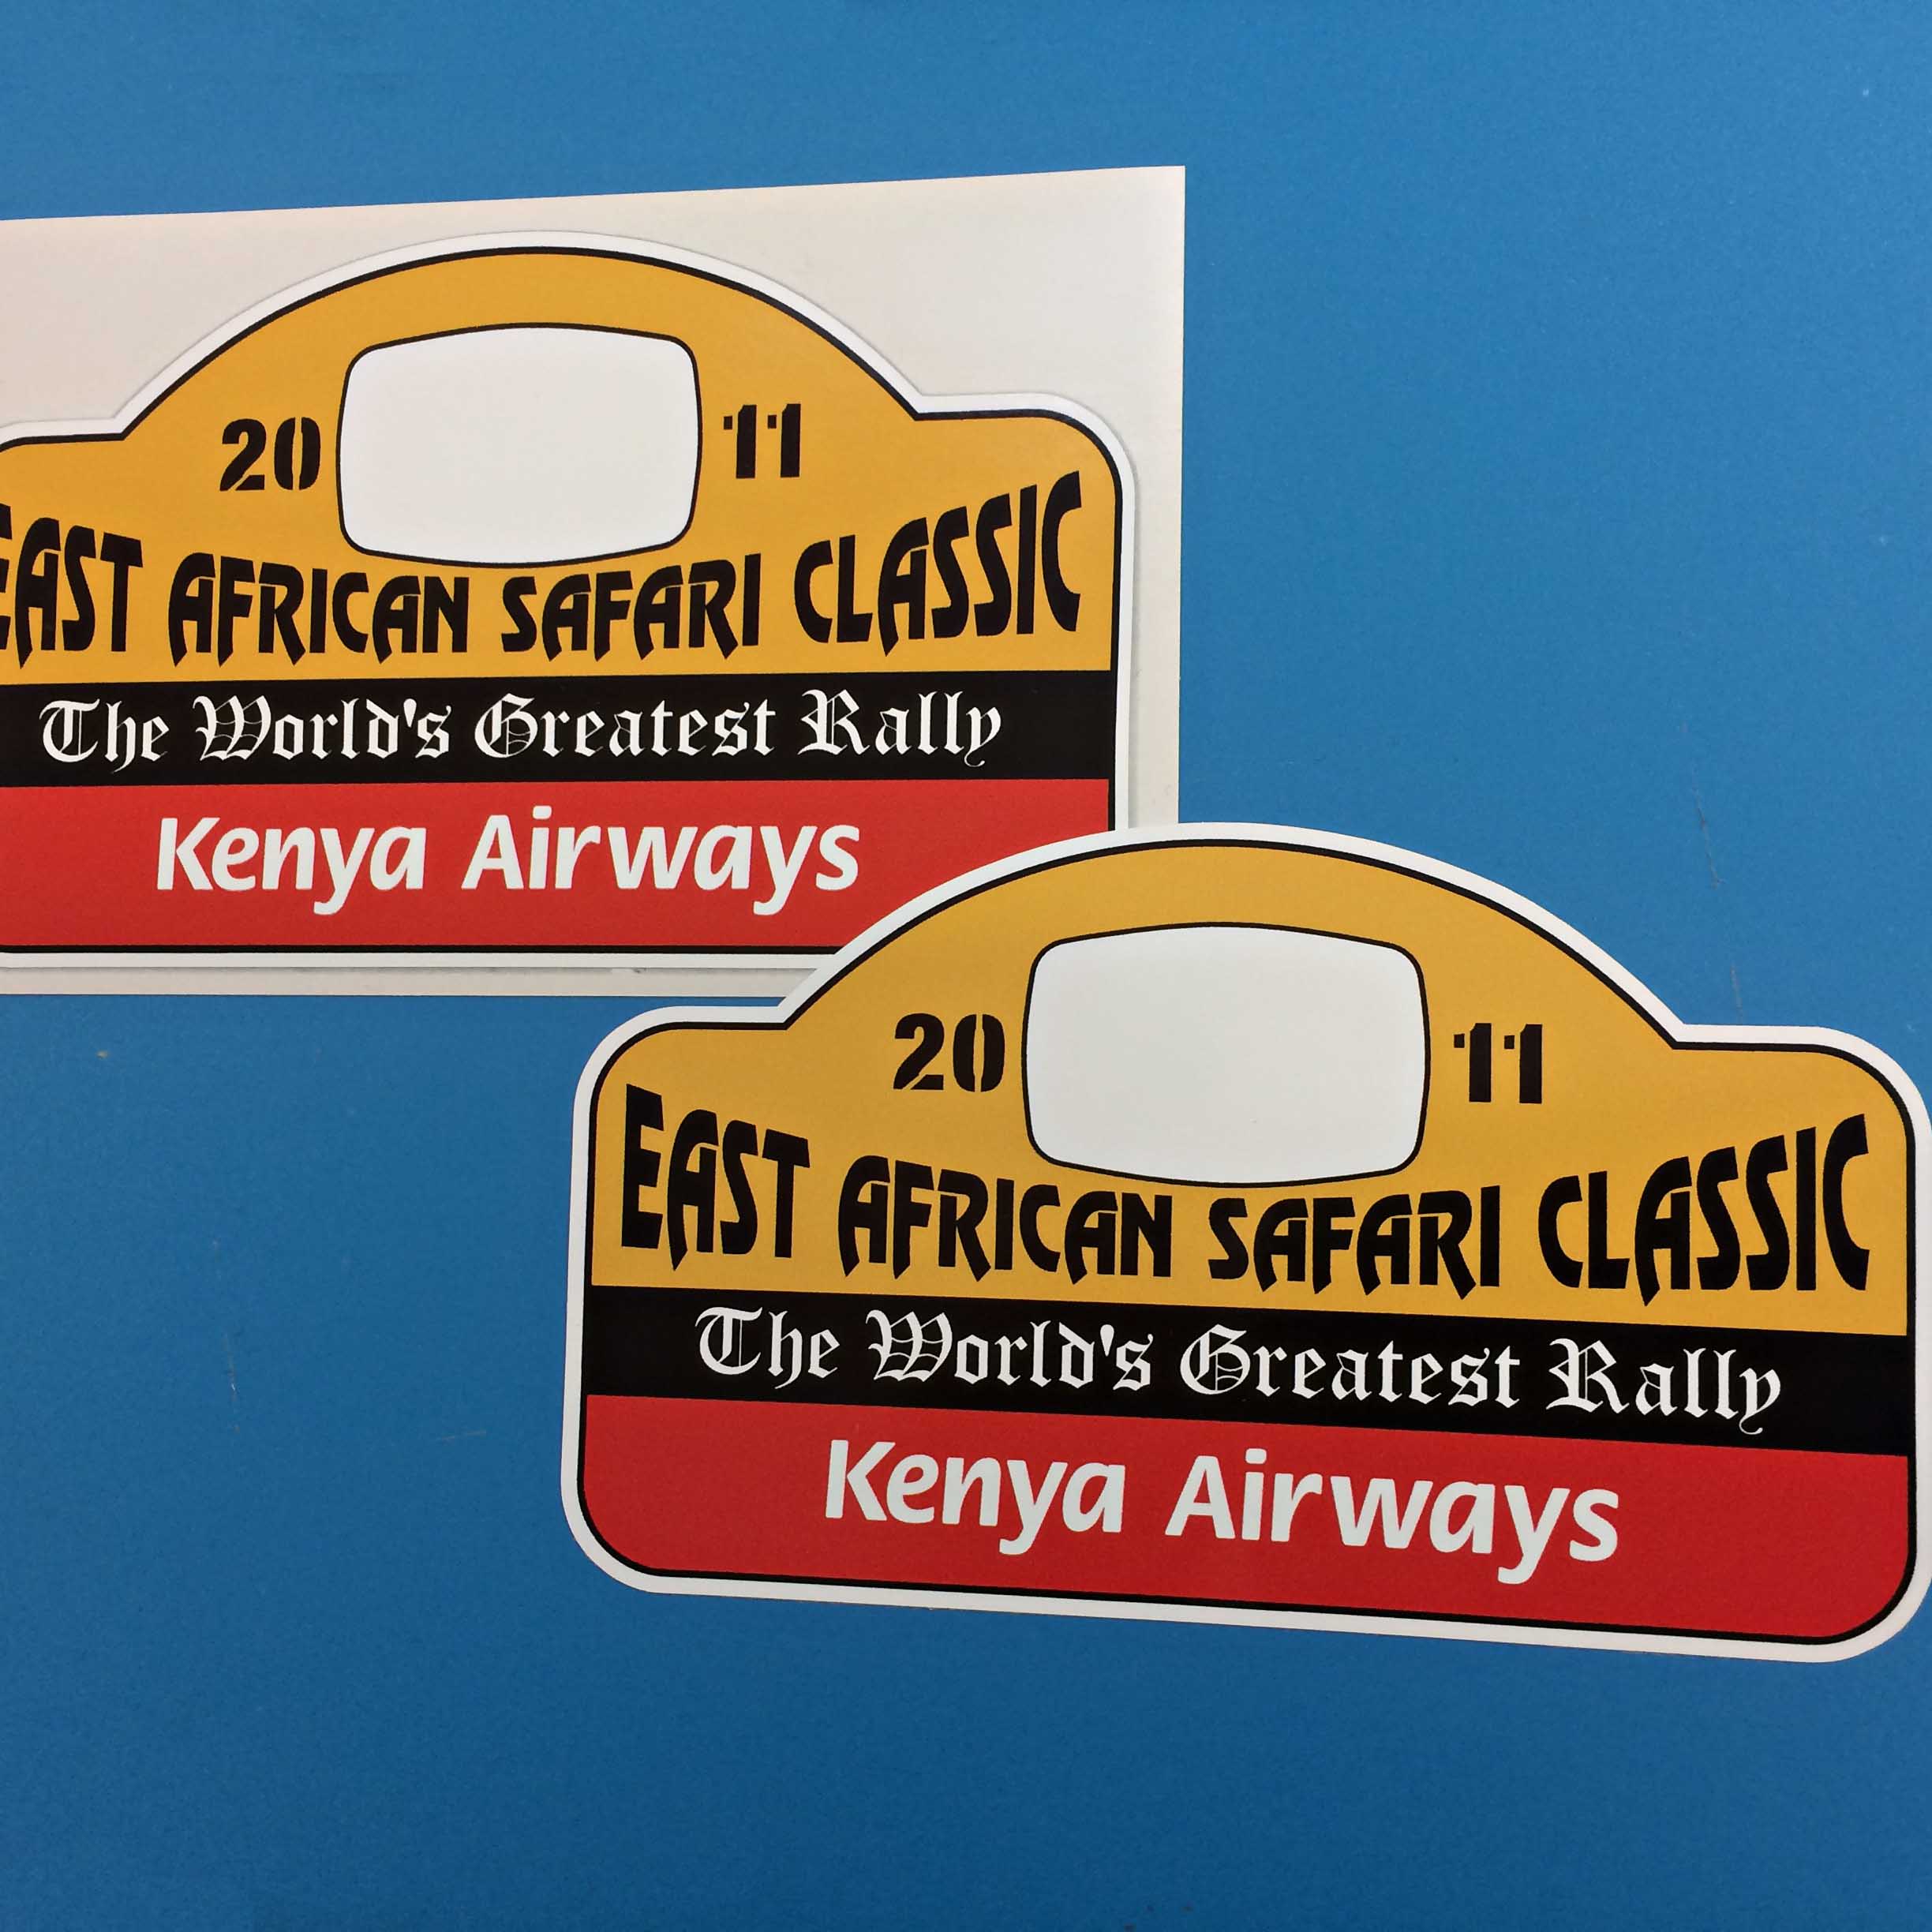 Three horizontal bands of colour. 2011 East African Safari Classic in black lettering on yellow. The World's Greatest Rally in white on black and Kenya Airways in white on a red band.